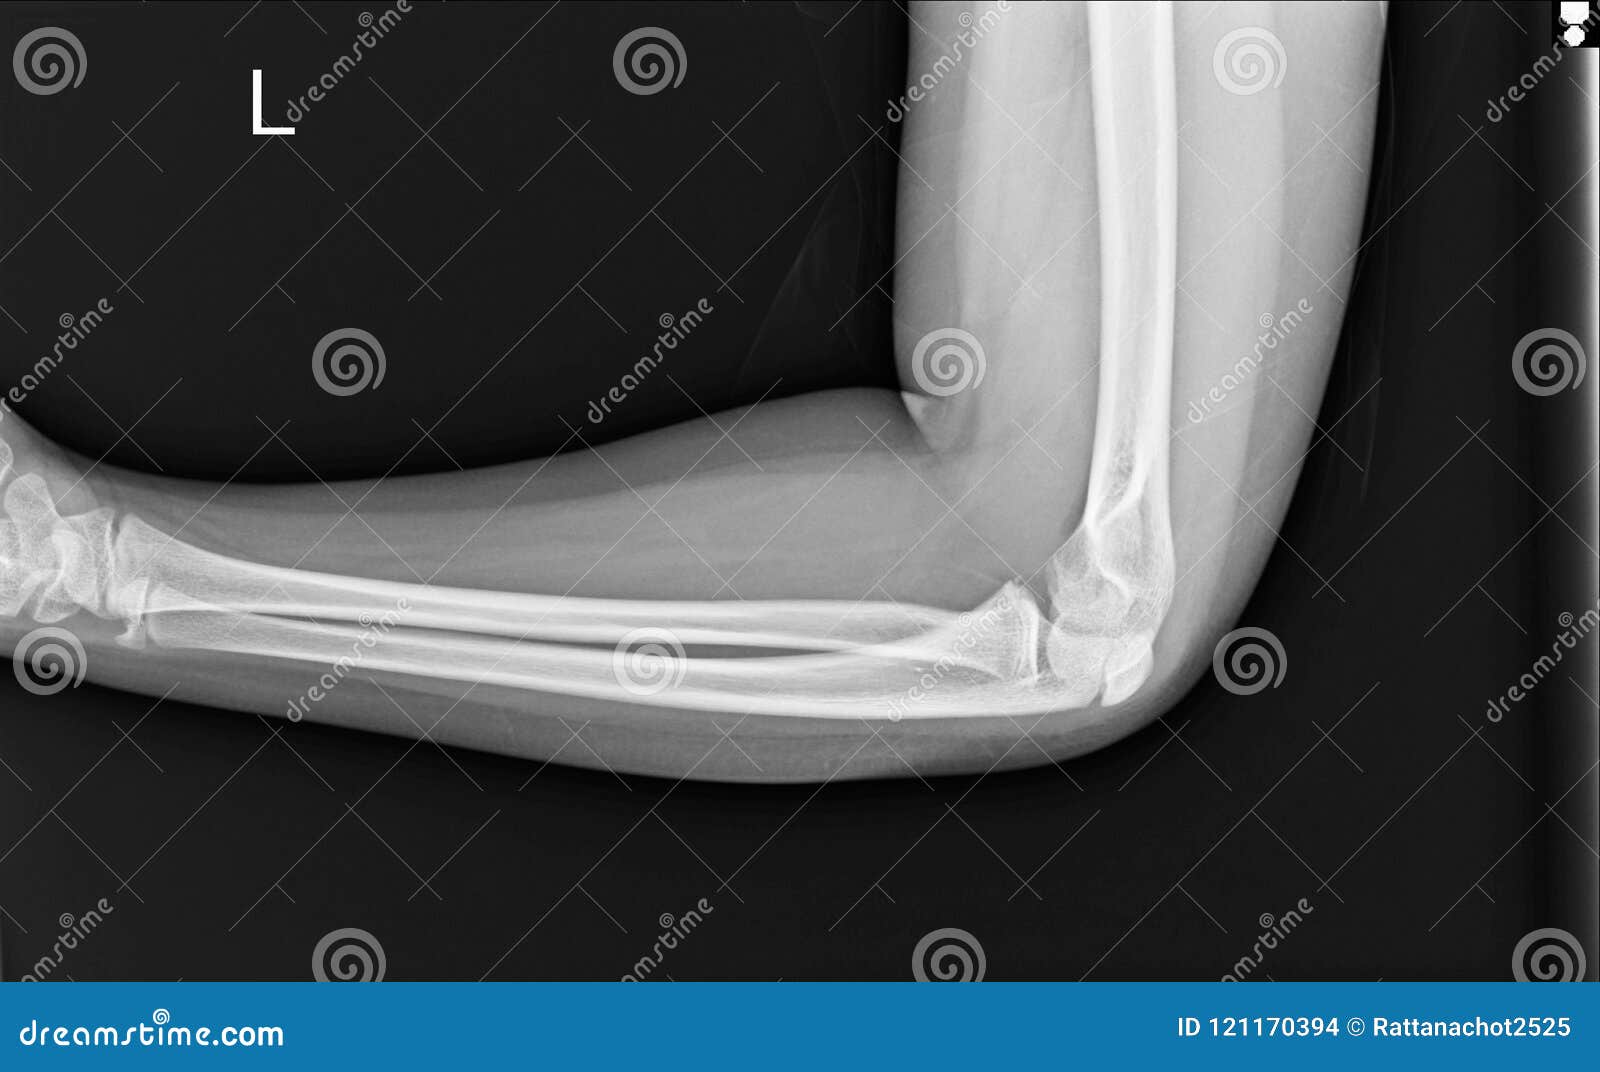 film elbow ap a male 25 year old showed fracture